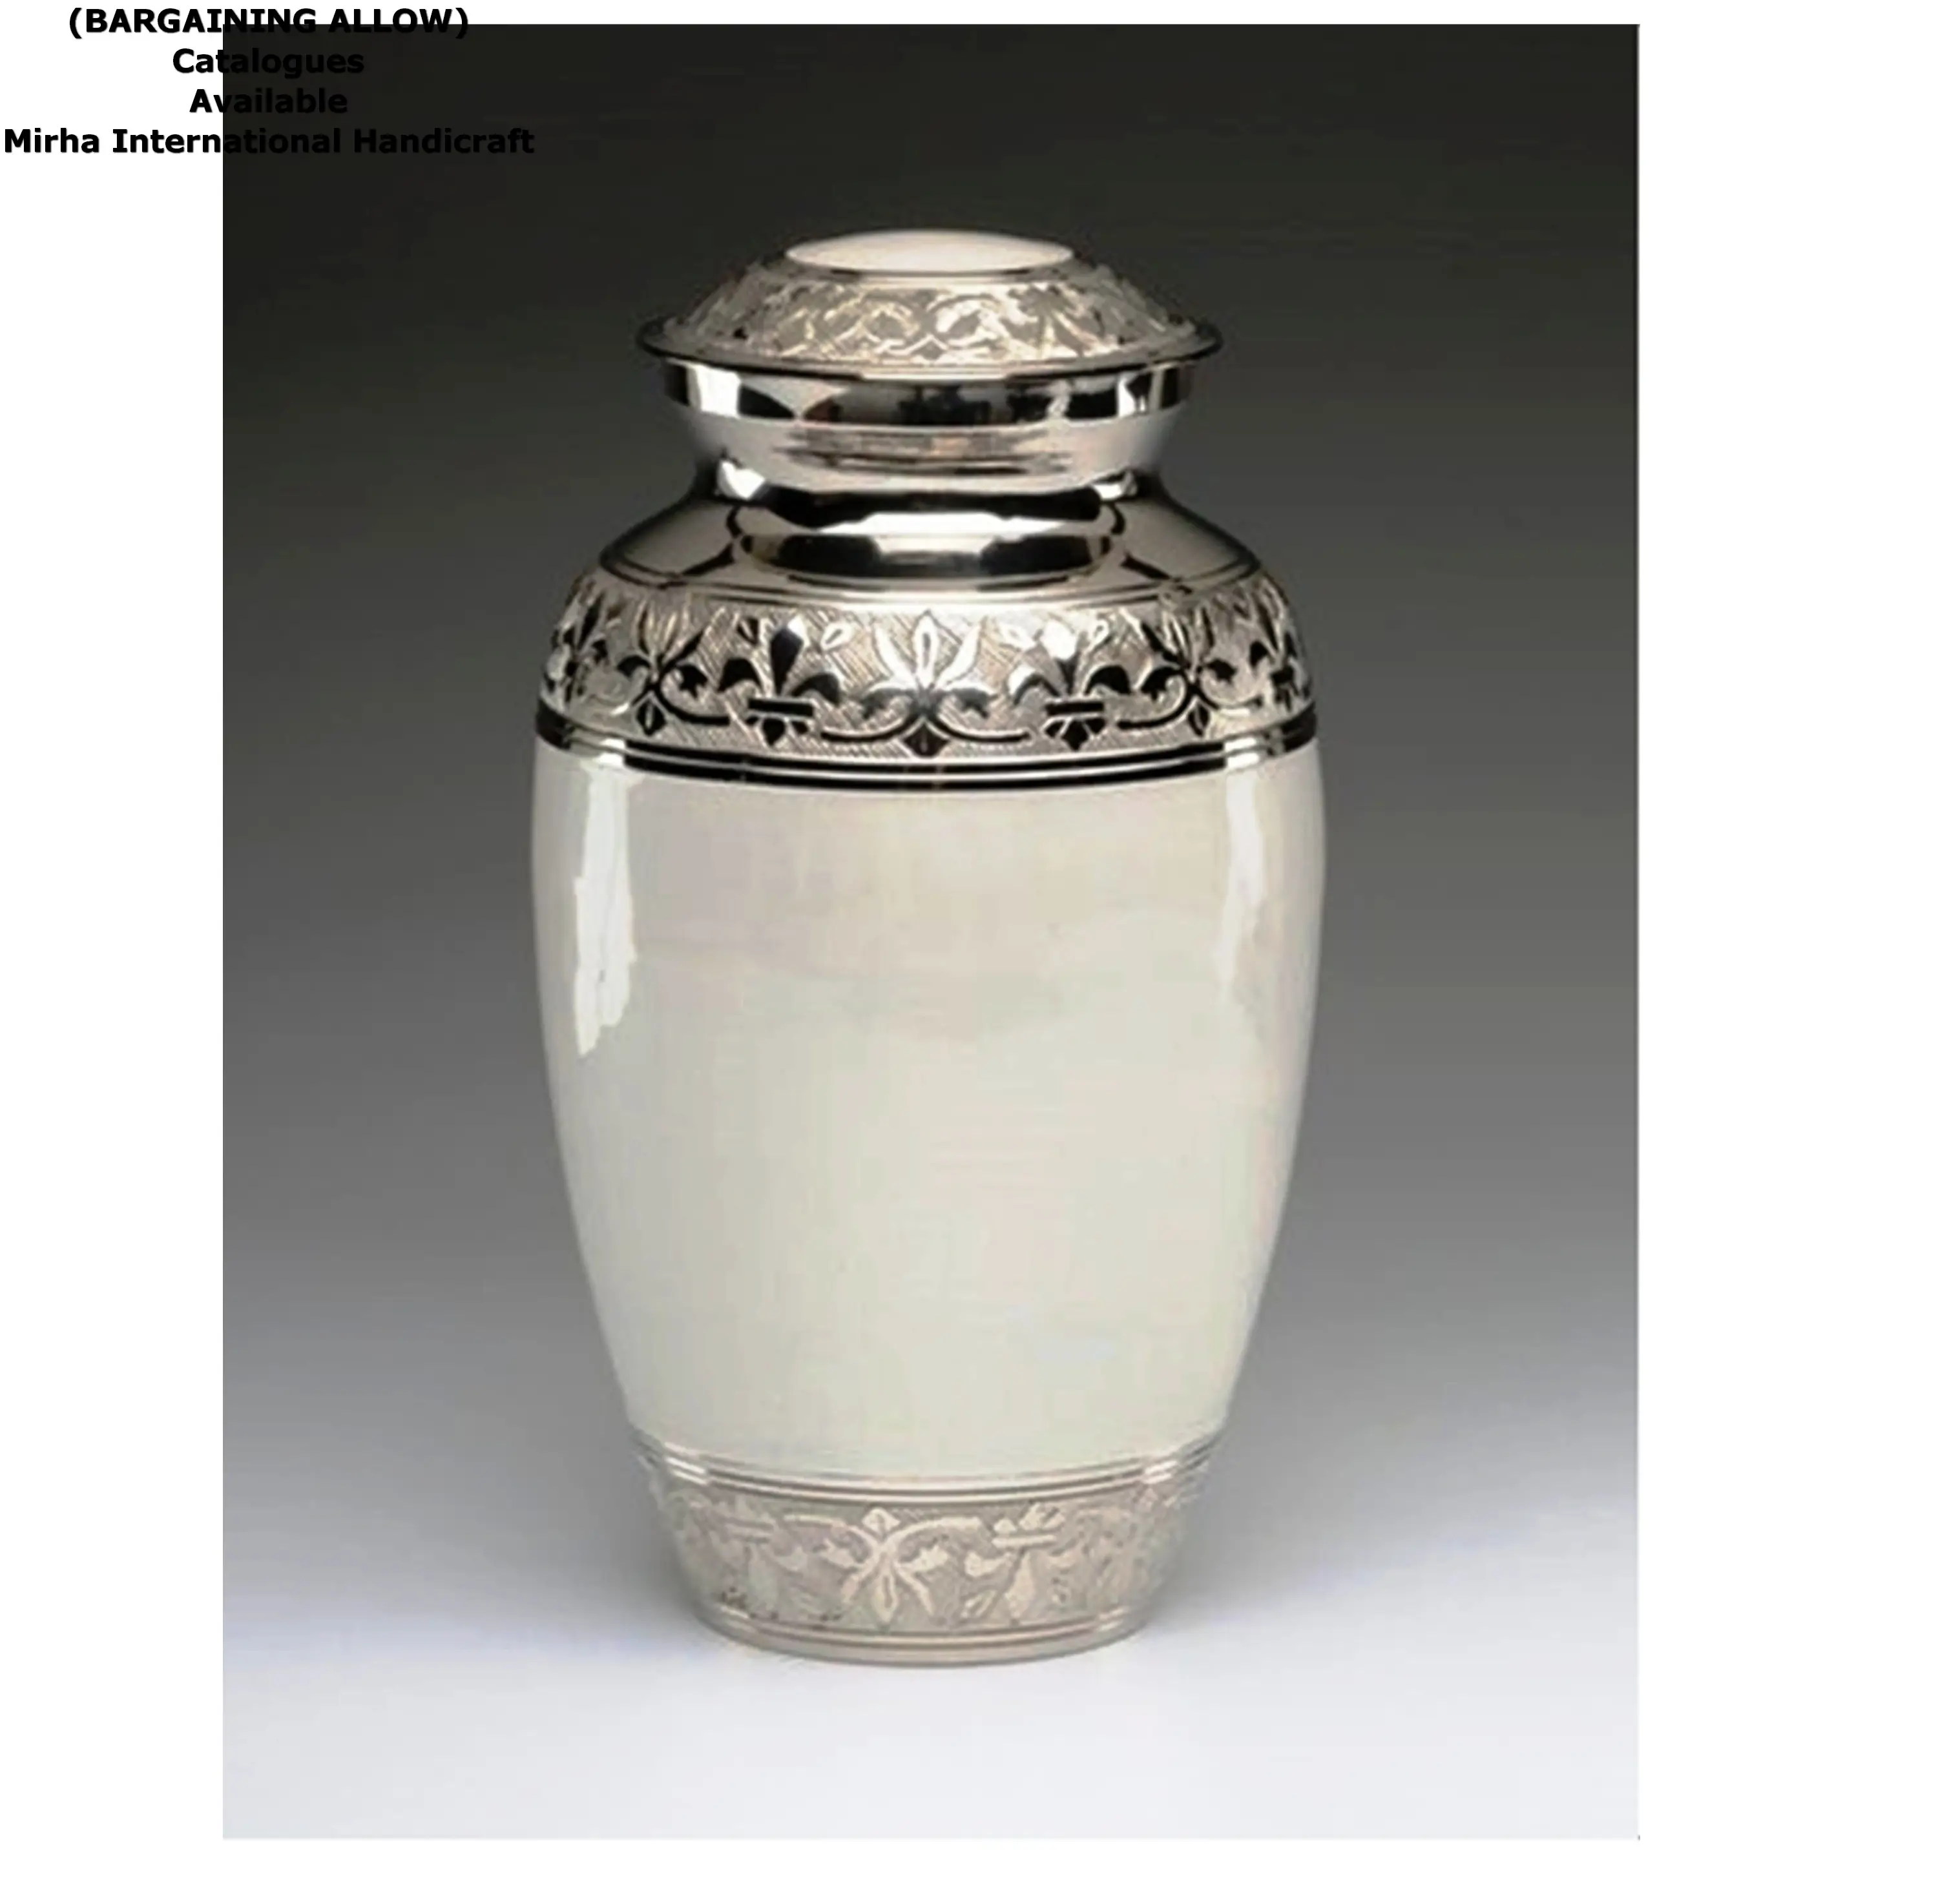 aluminum Embossed Ash Cremation Urn White Enamel silver Antique High Quality Human Ashes Urns for Women and Man